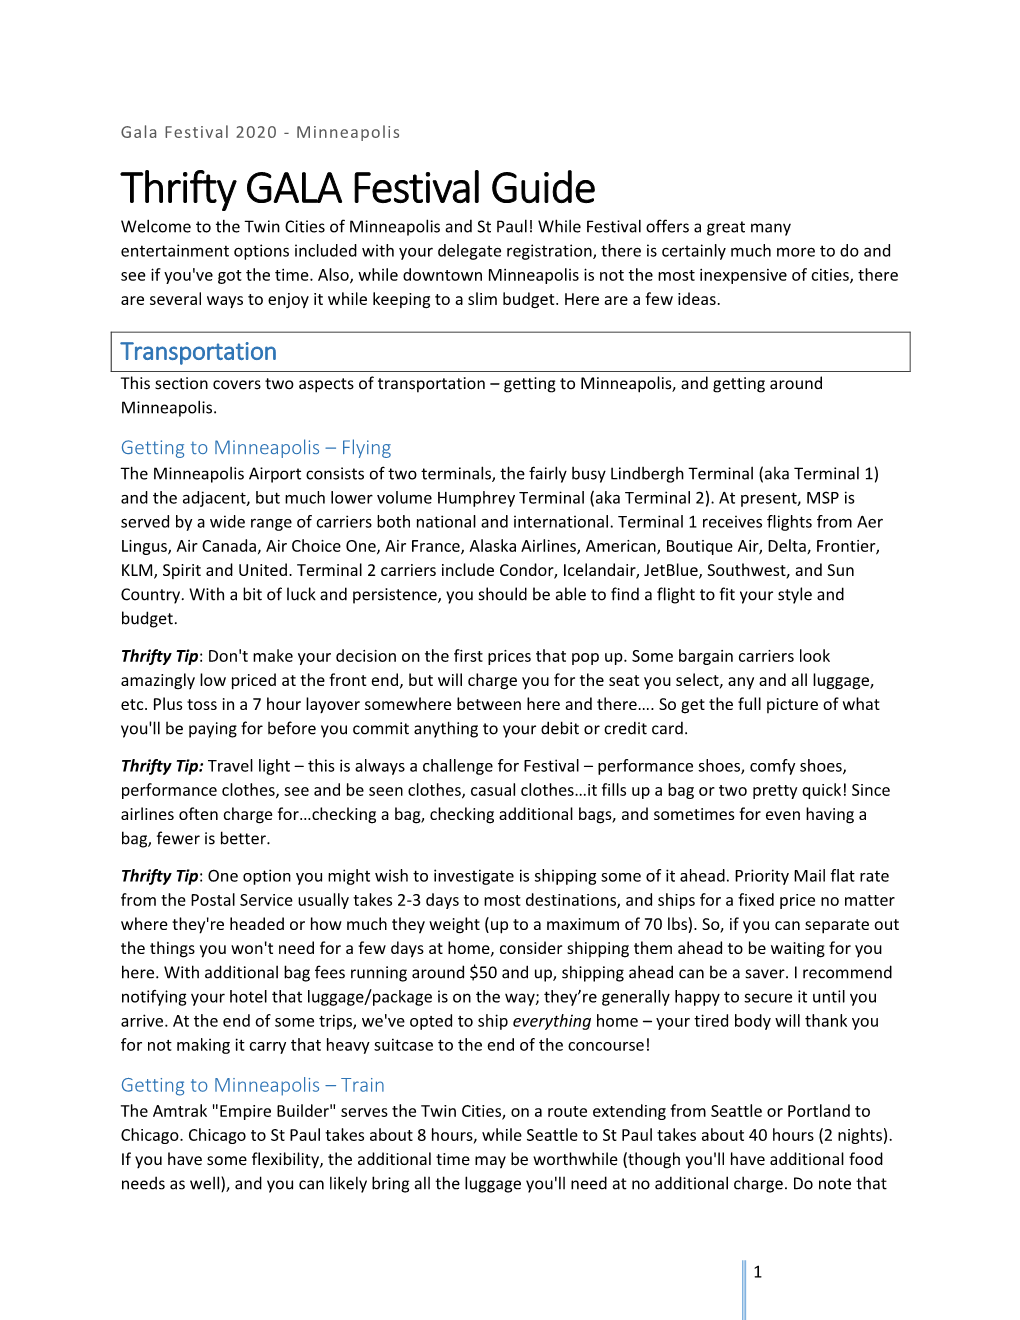 Thrifty GALA Festival Guide